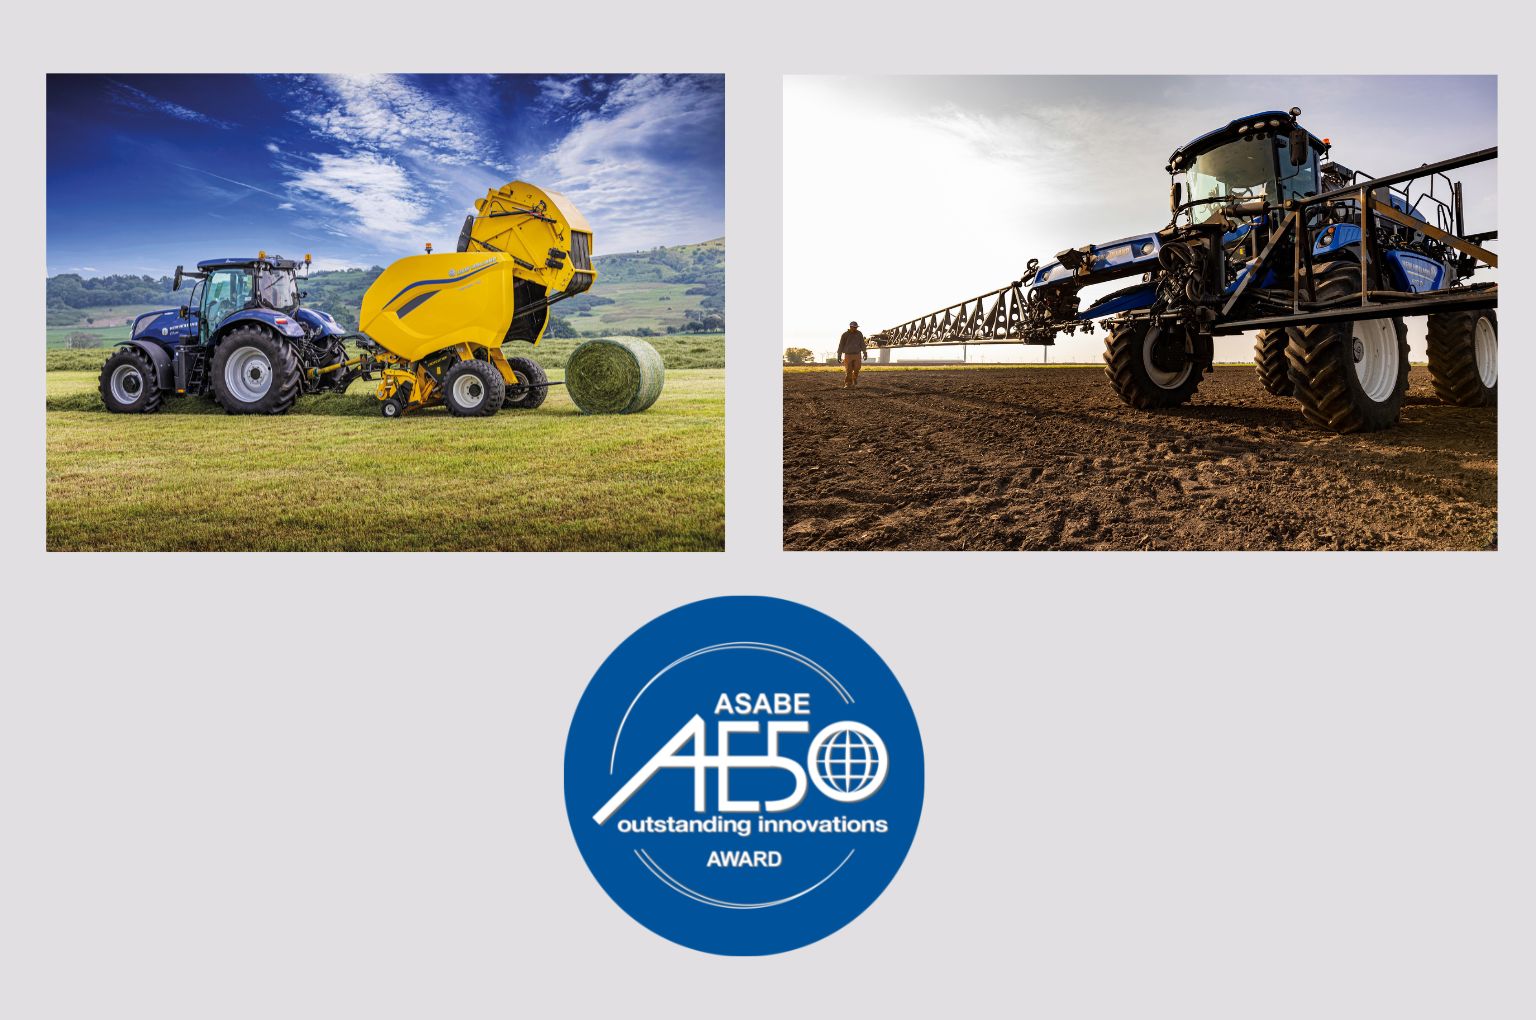 AE50 awards for New Holland